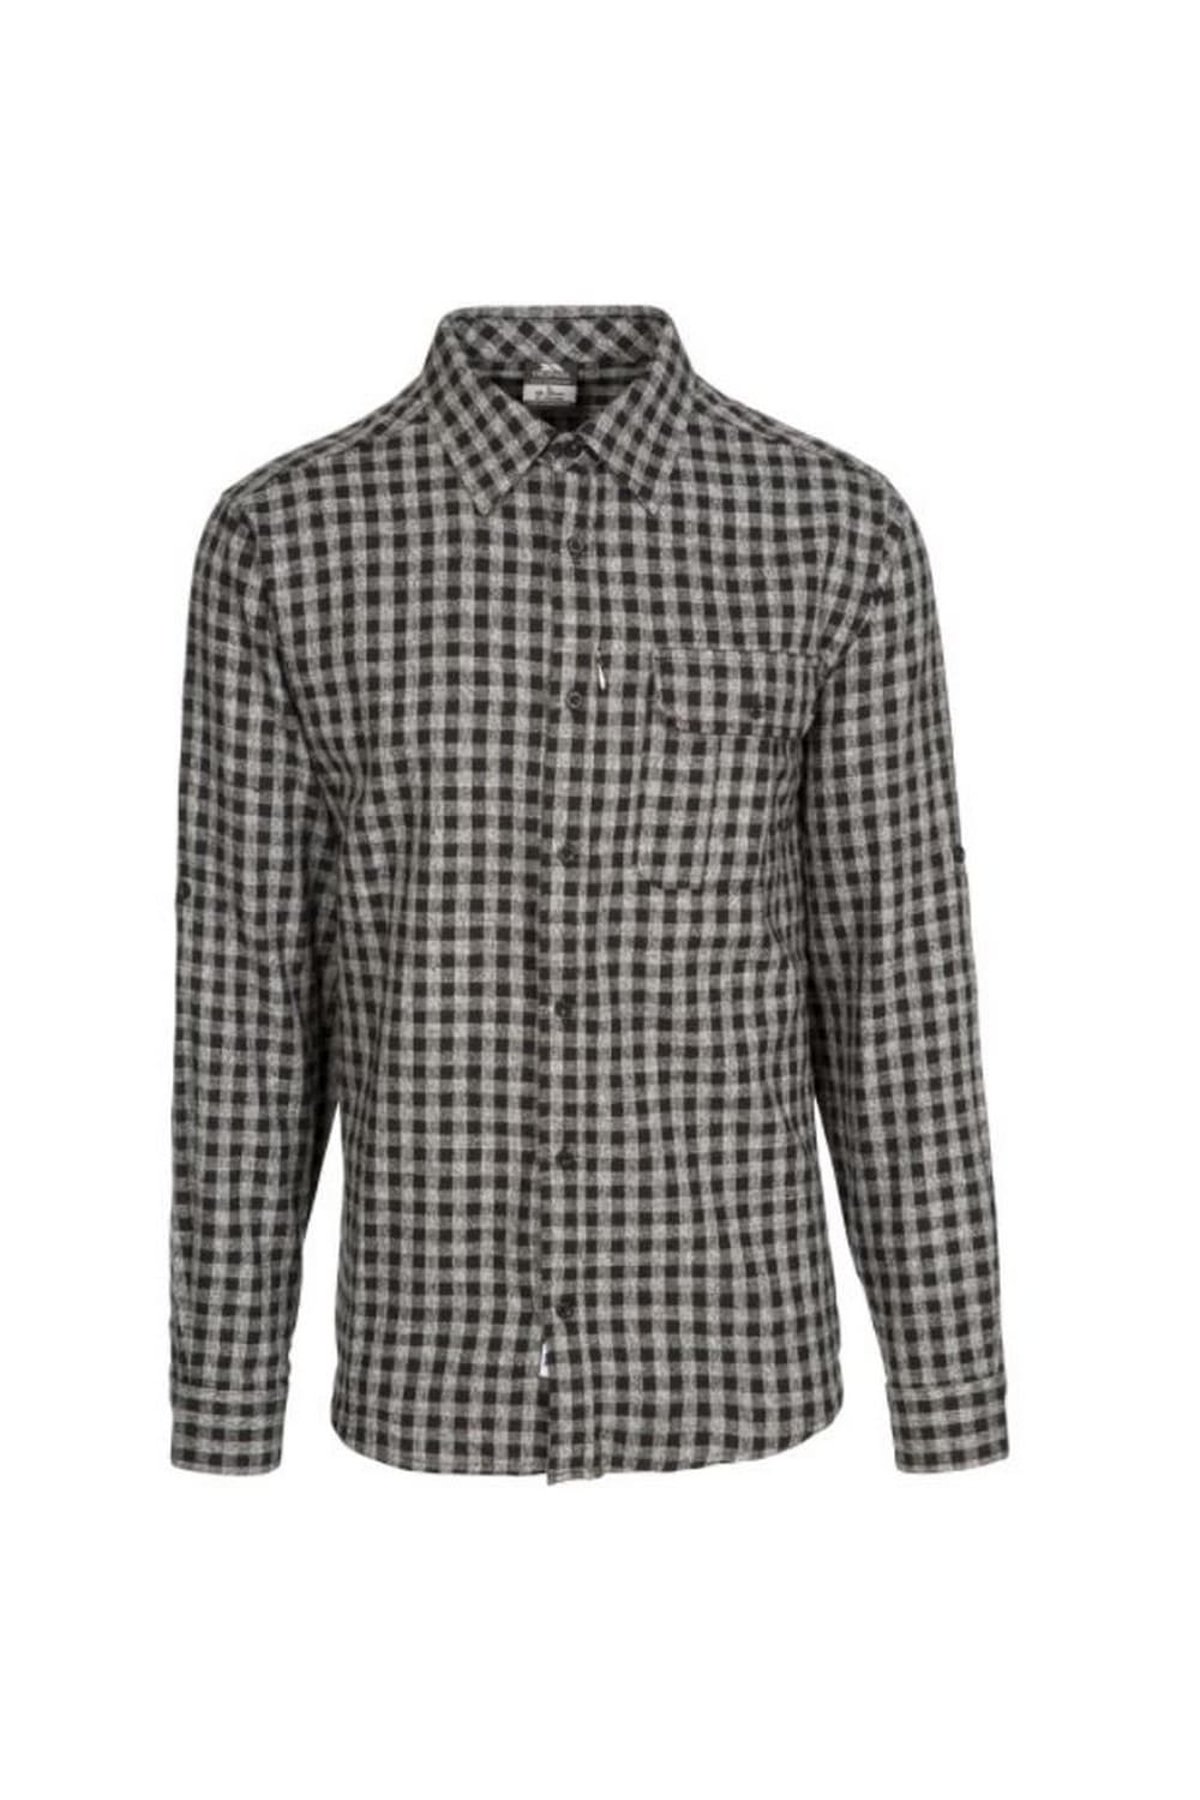 PARTICIPATE TRESPASS MALE Checked SHIRT Various Colours and Sizes 